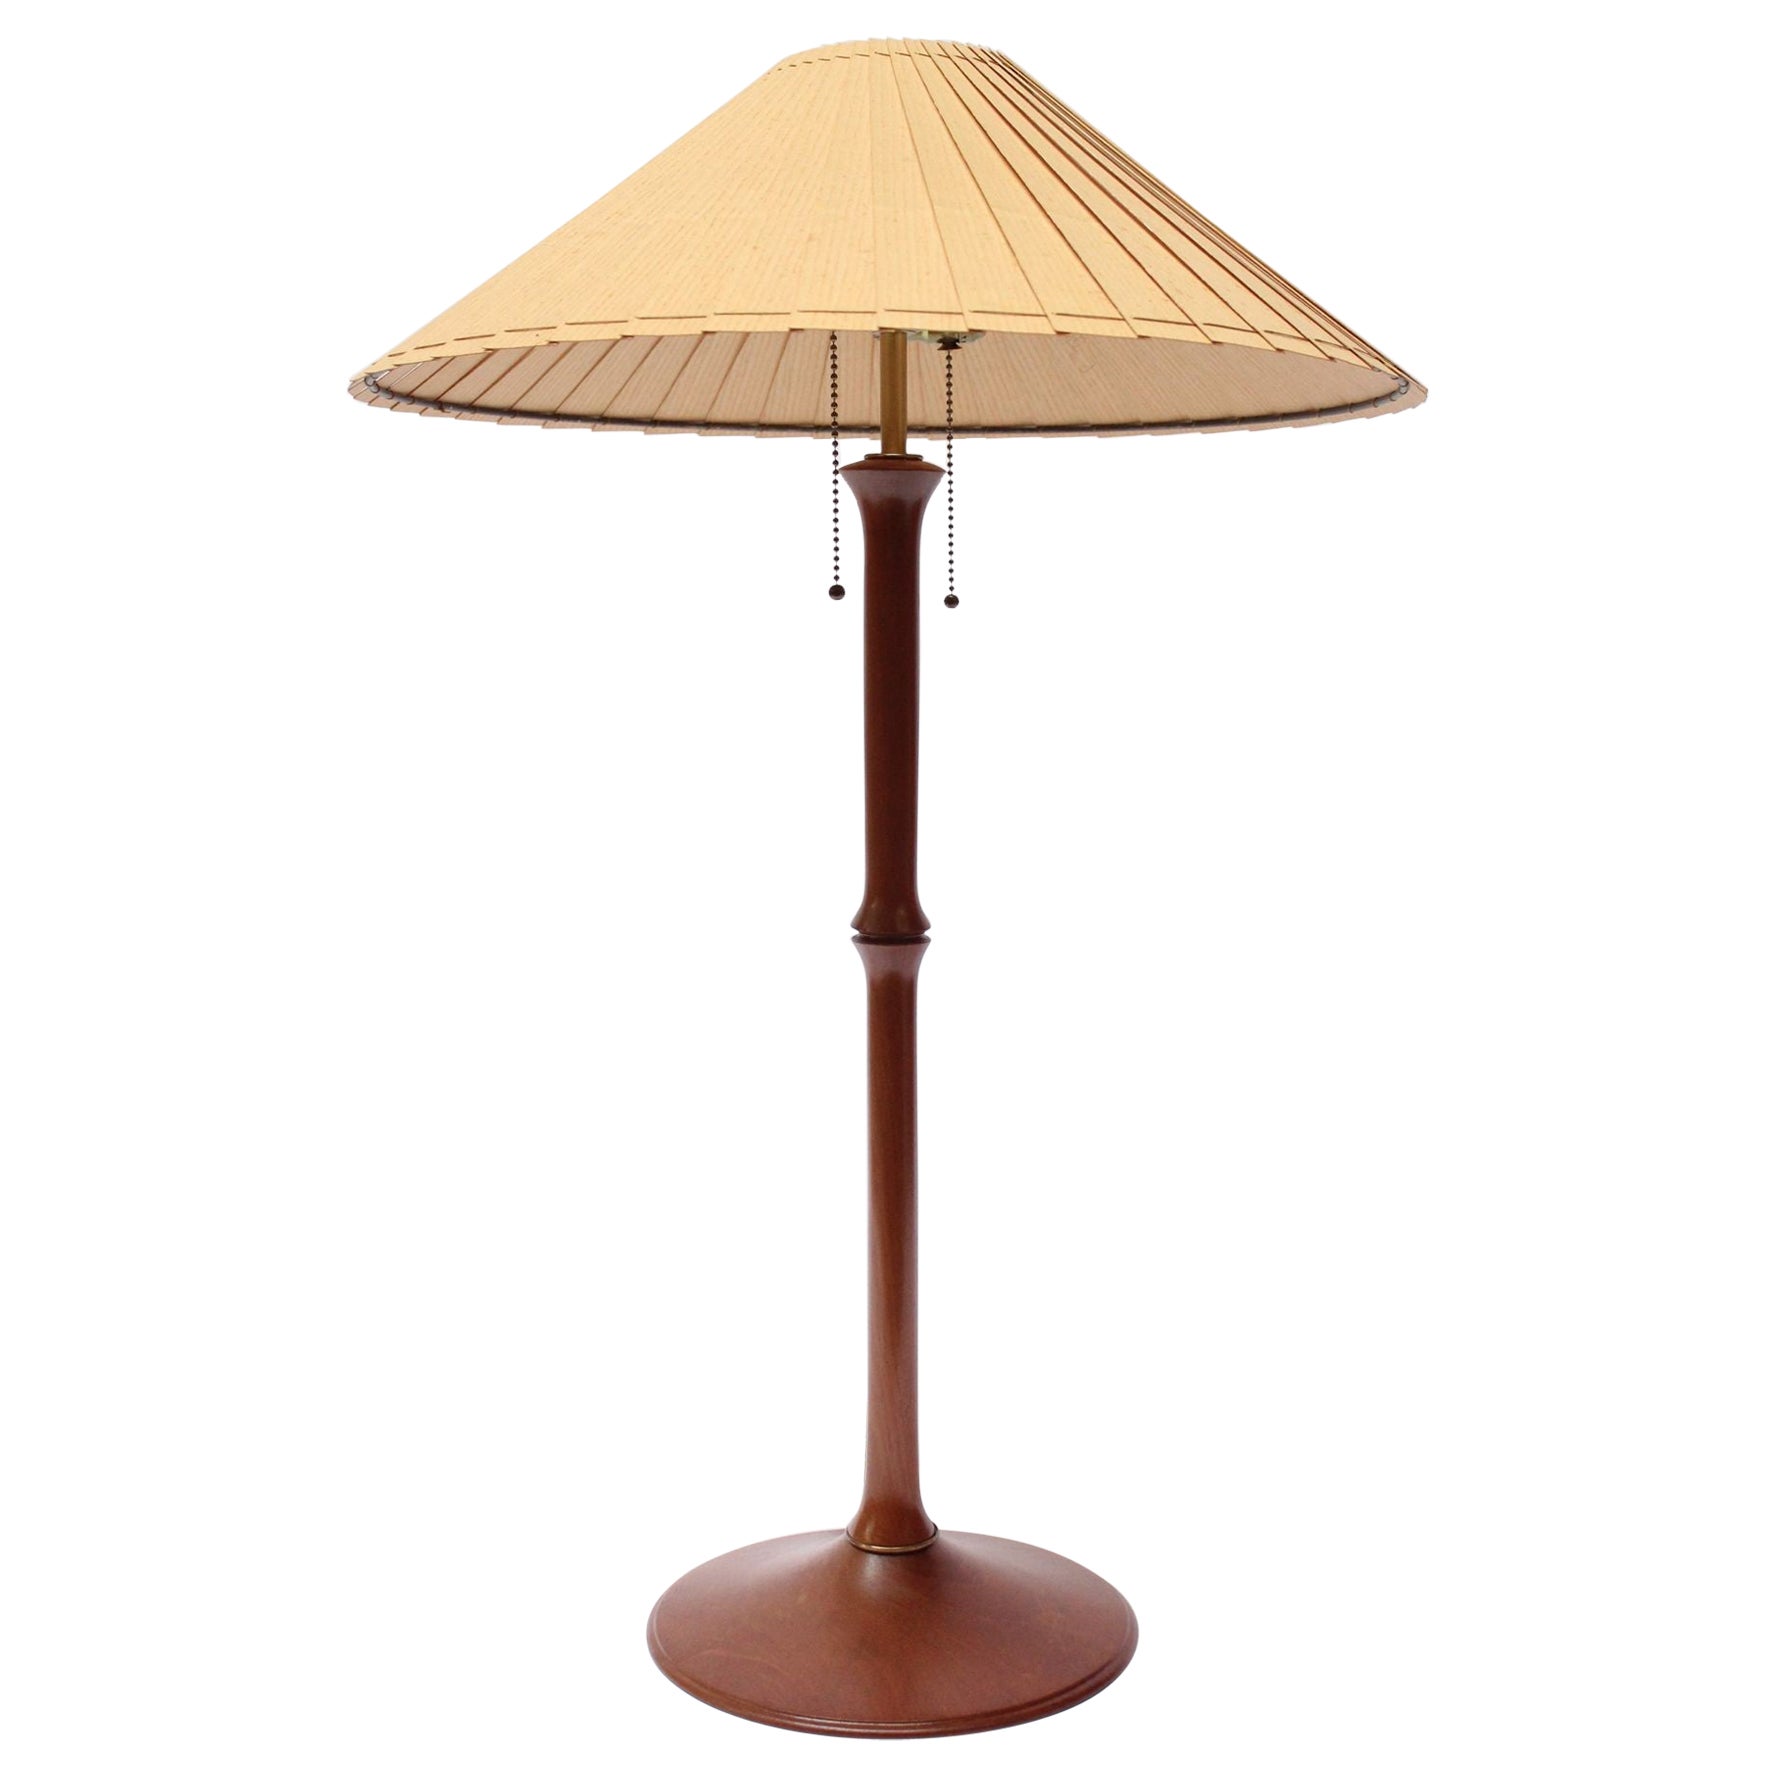 Studio Craft Sculptural Cherry Wood and Brass Table Lamp with Original Shade For Sale